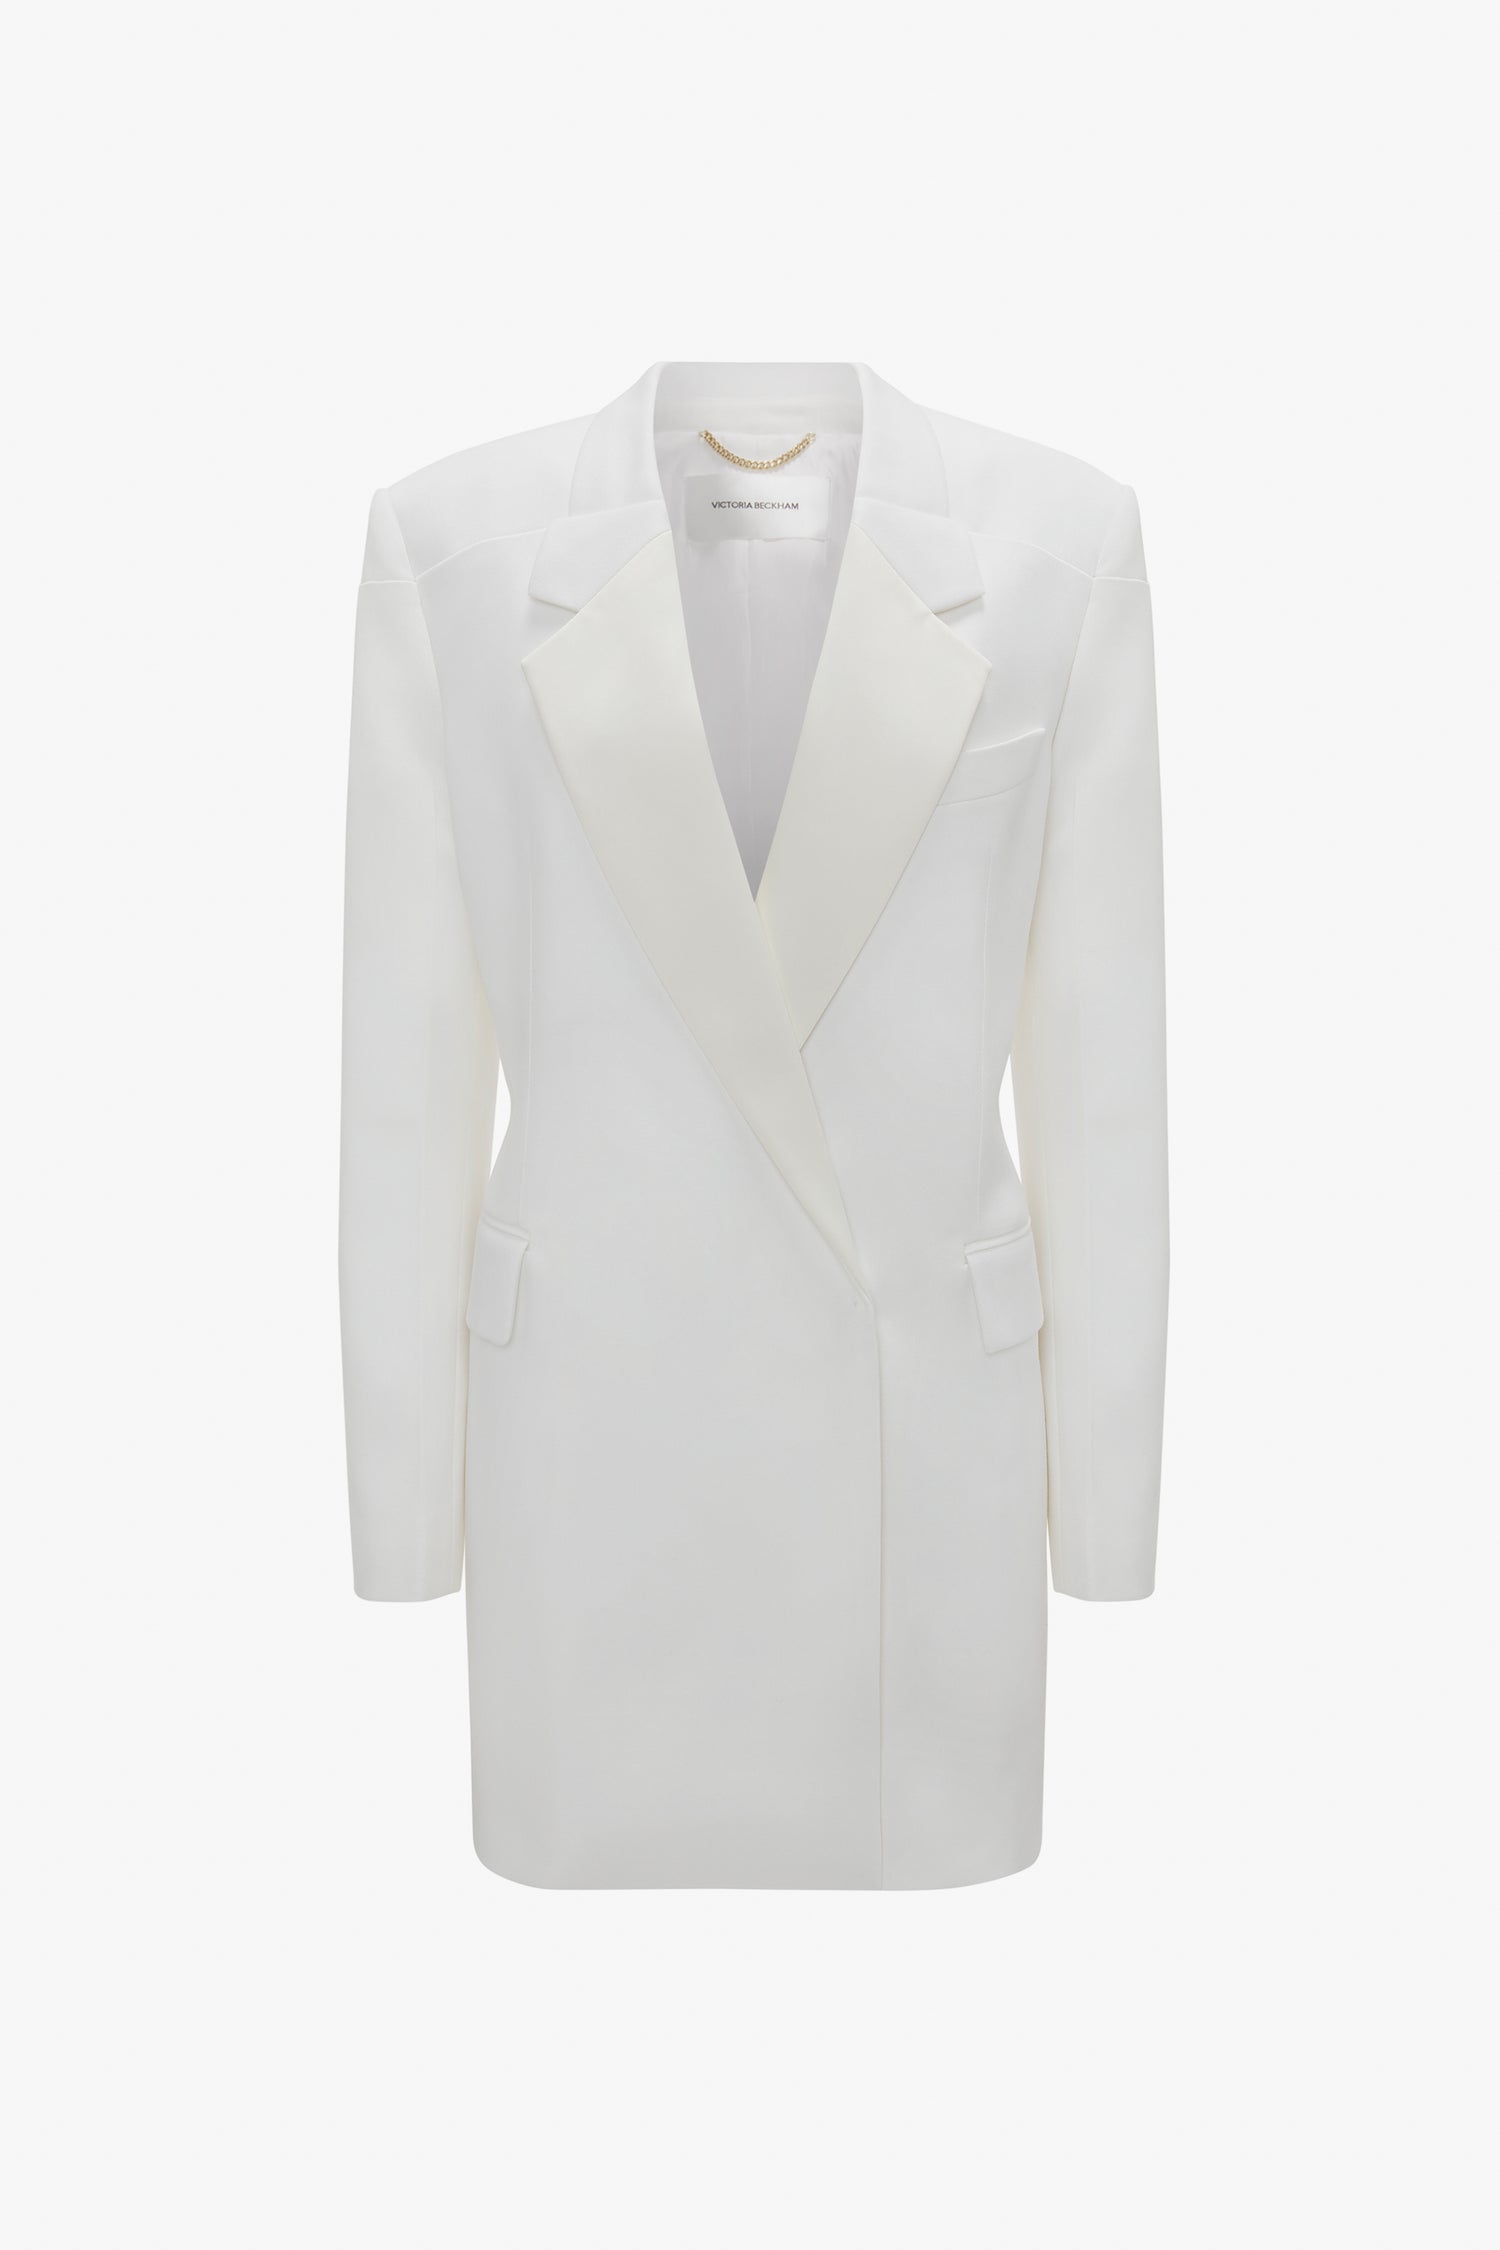 Double-breasted white tuxedo-style long jacket with peaked lapels and two side flap pockets, isolated on a white background from Victoria Beckham's Exclusive Fold Shoulder Detail Dress In Ivory collection.